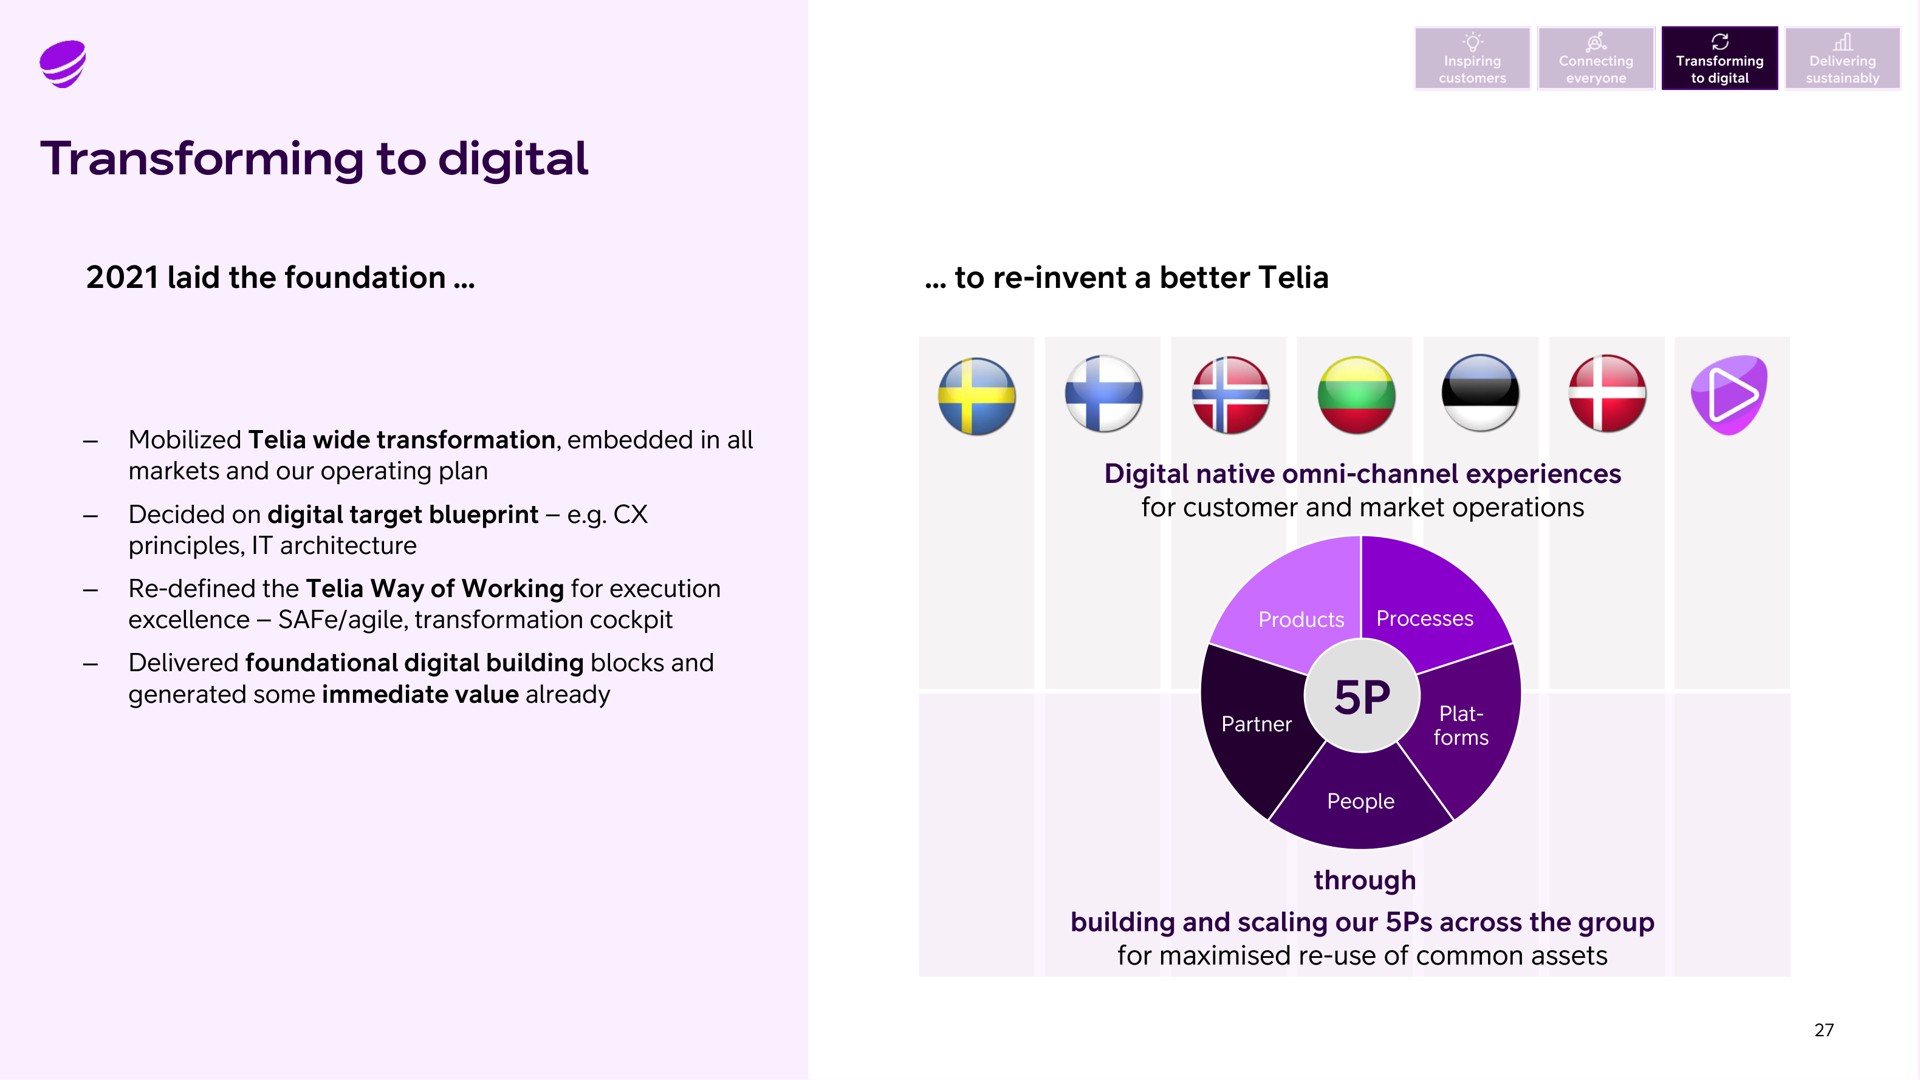 transforming to digital laid the foundation to invent a better digital native channel experiences for customer and market operations through building and scaling our across the group for use of common assets as we | Telia Company